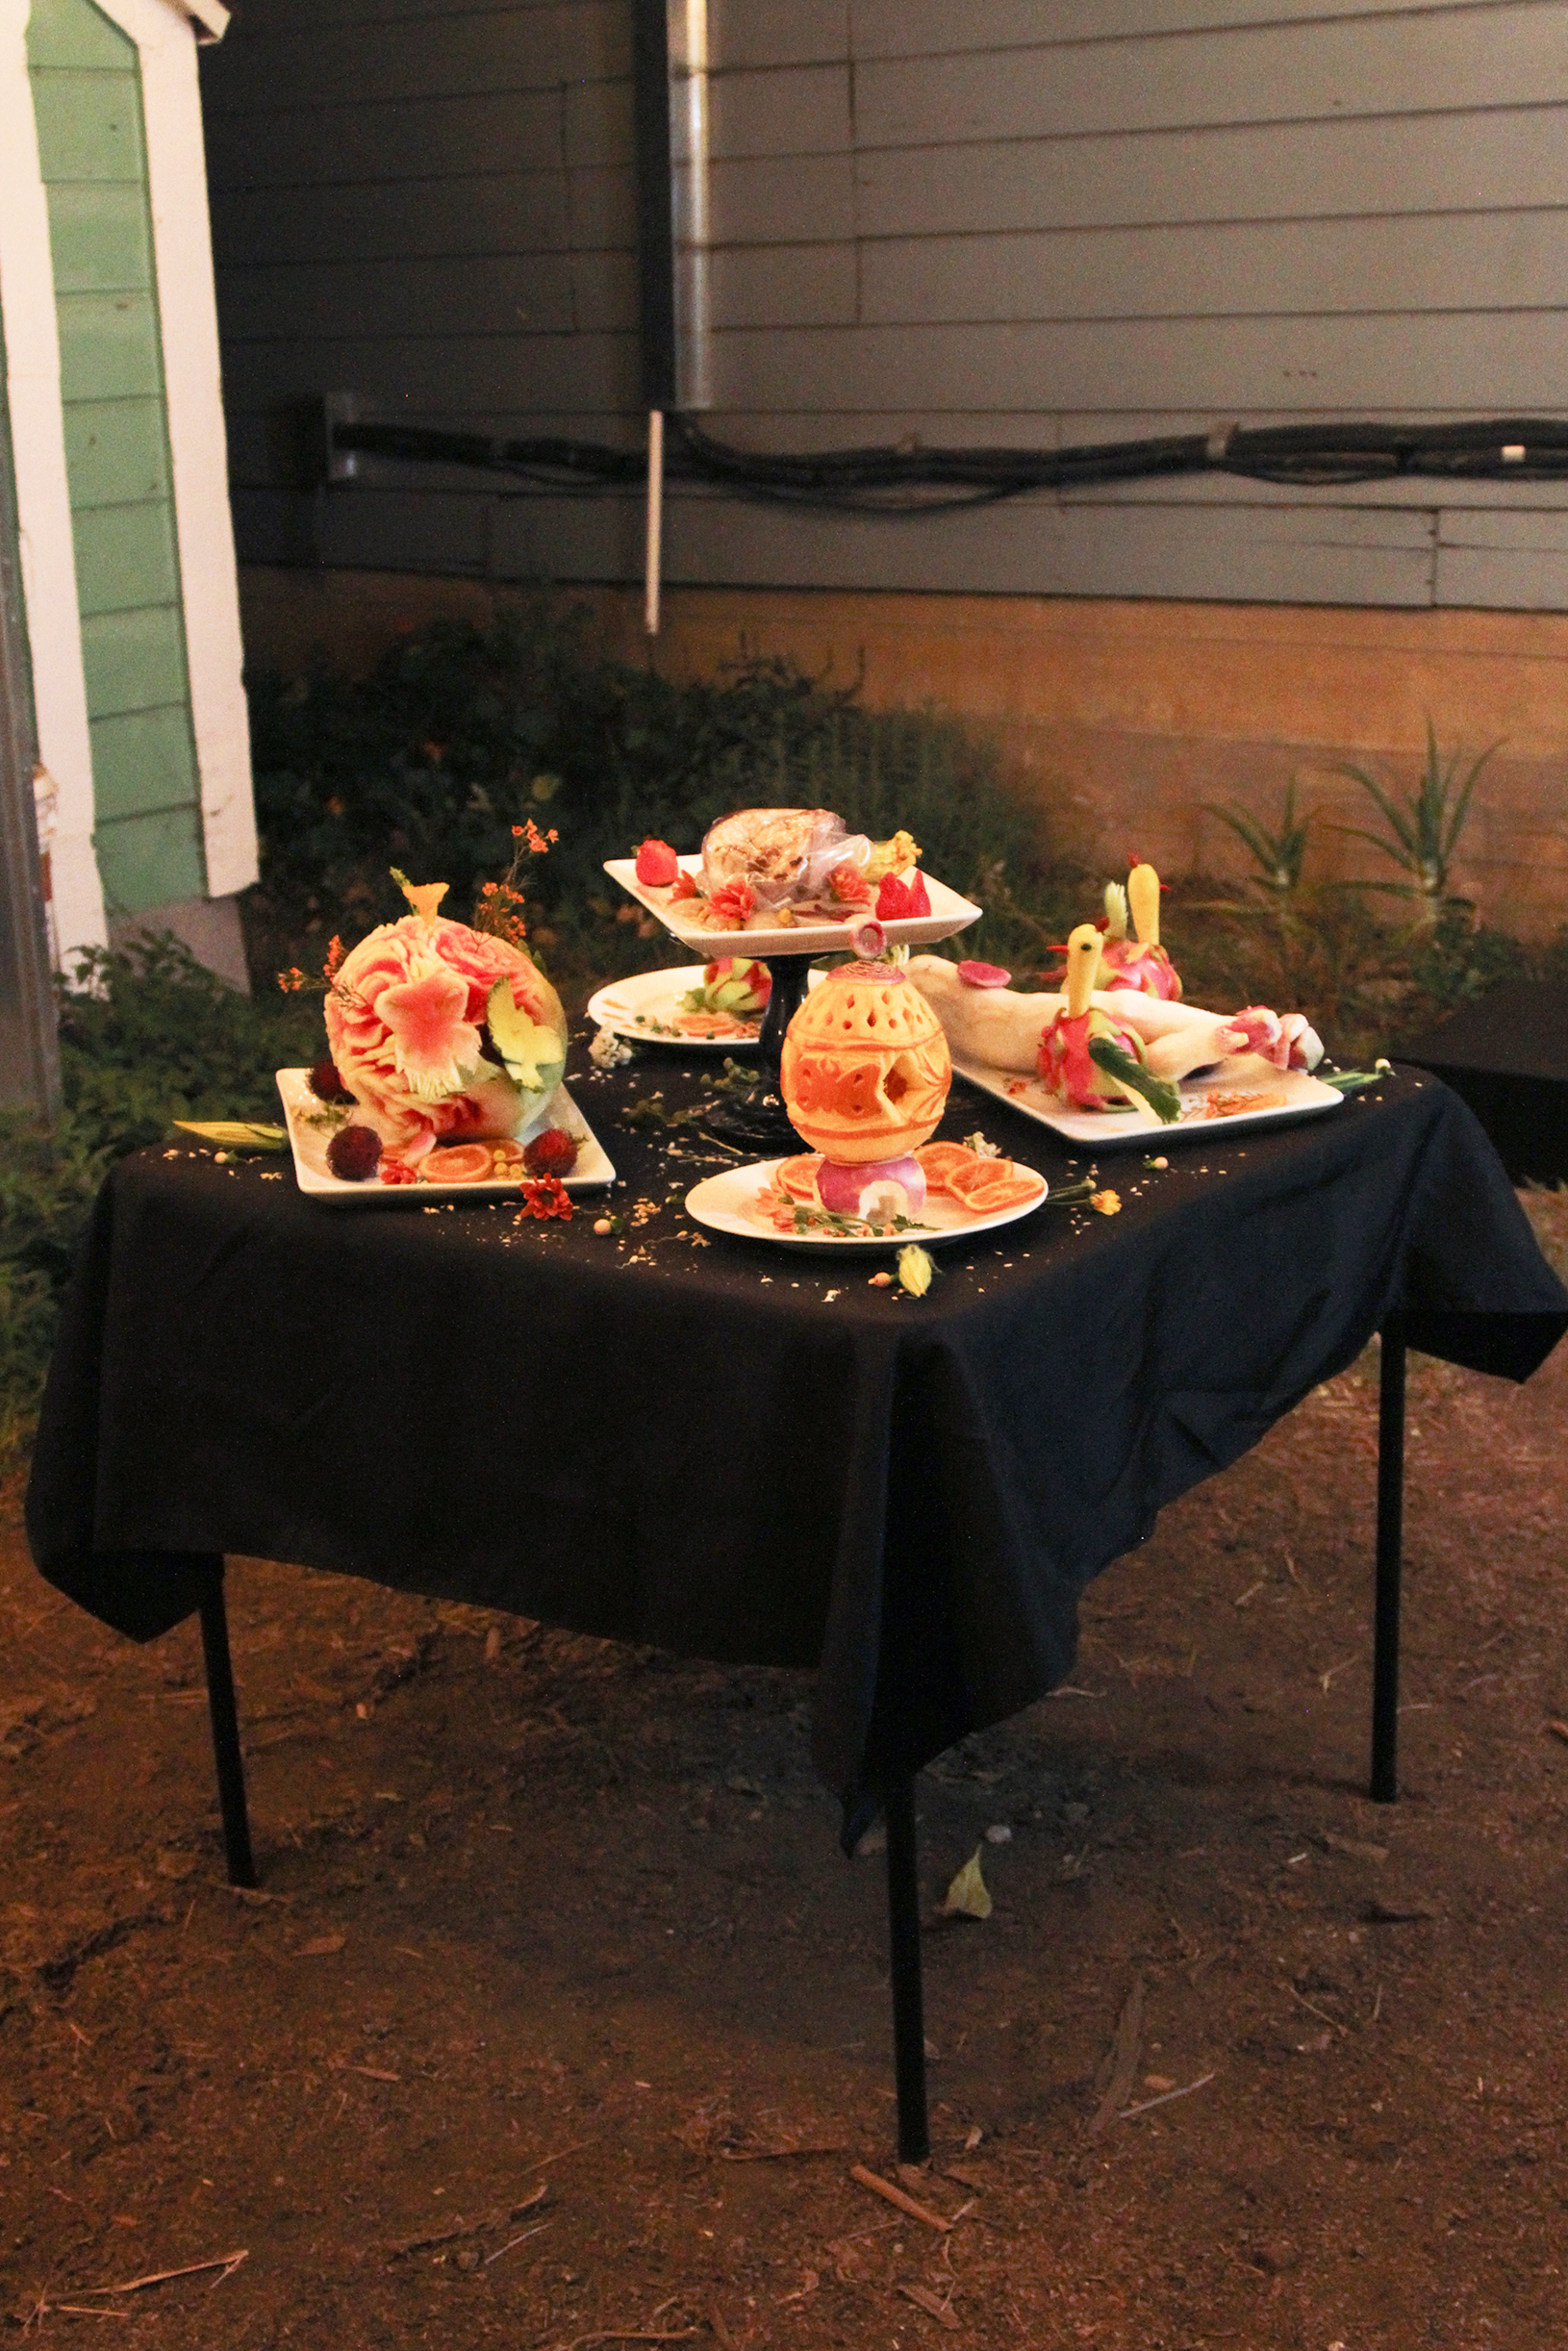 Table of food sculptures outside in a backyard at night